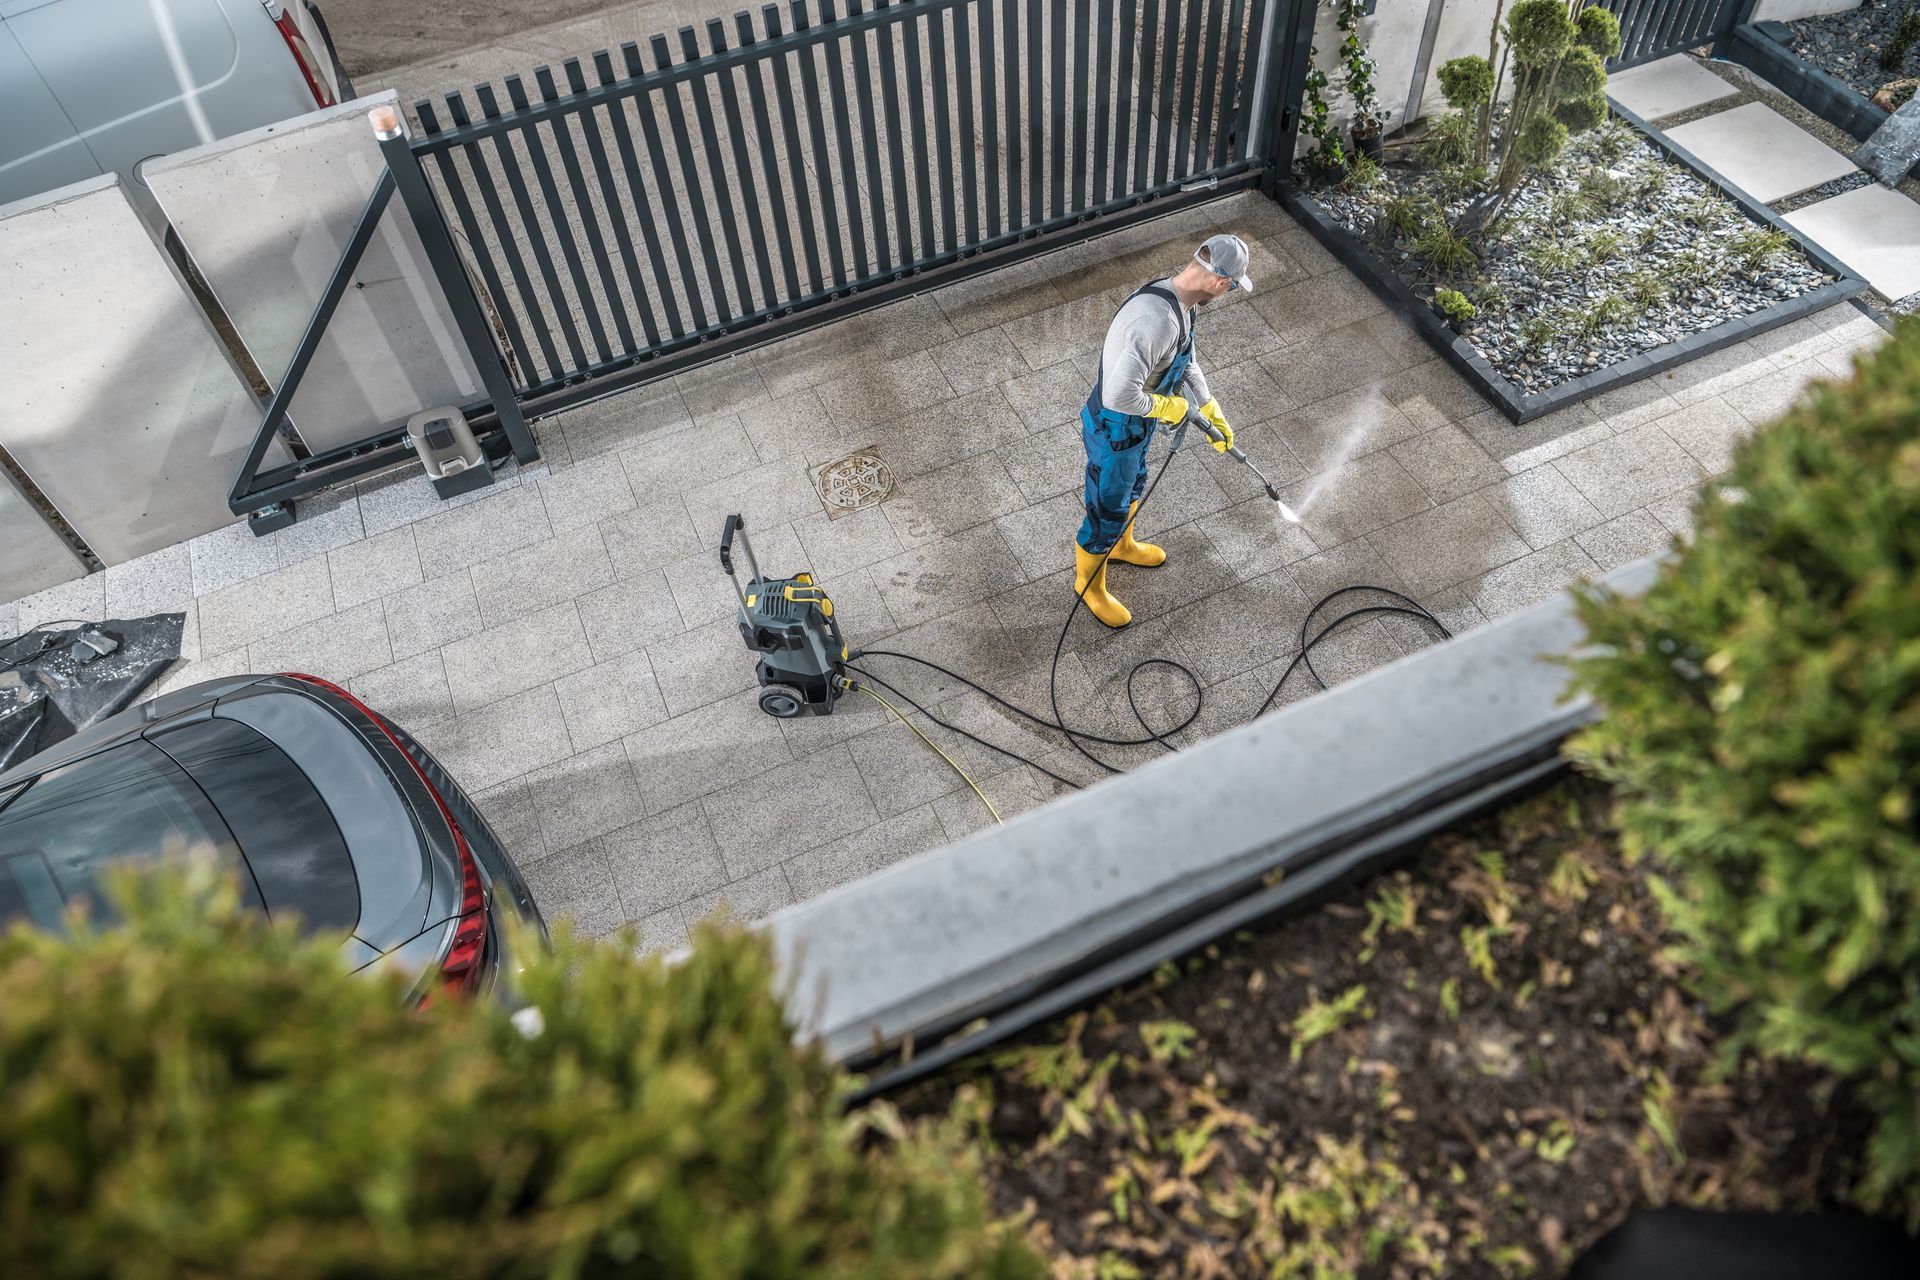 A man is using a high pressure washer to clean a driveway.